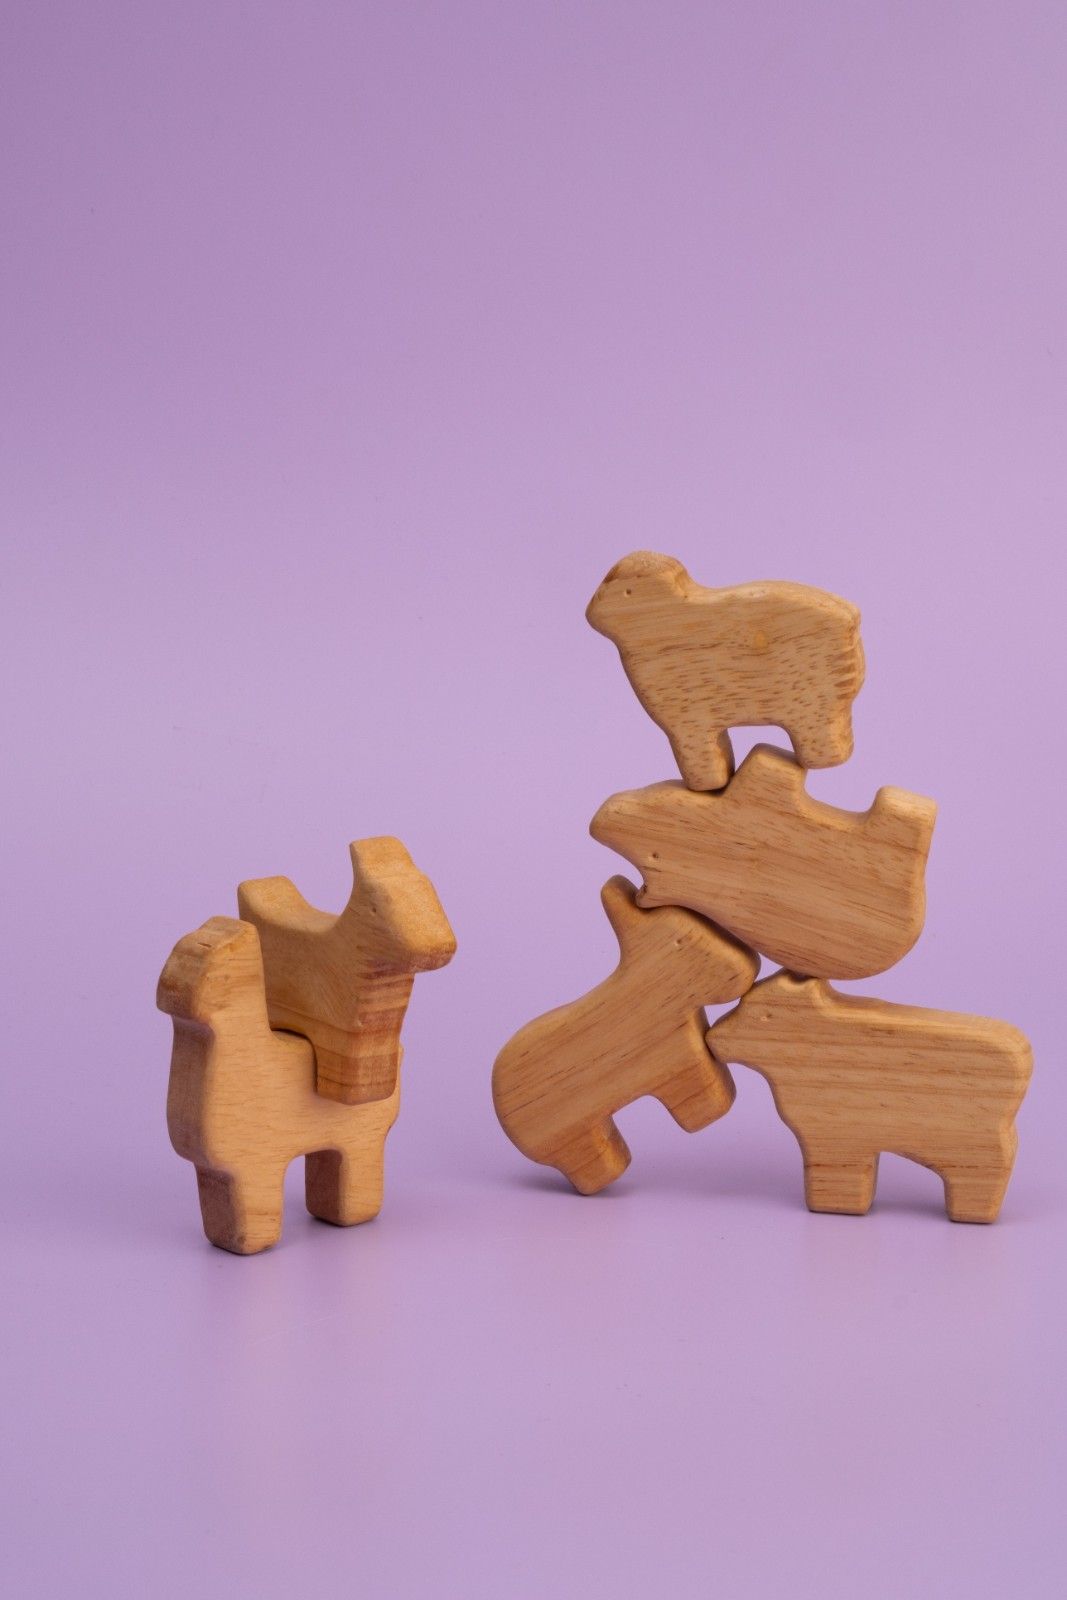 Gender-Neutral Play: How Wooden Toys Promote Inclusivity